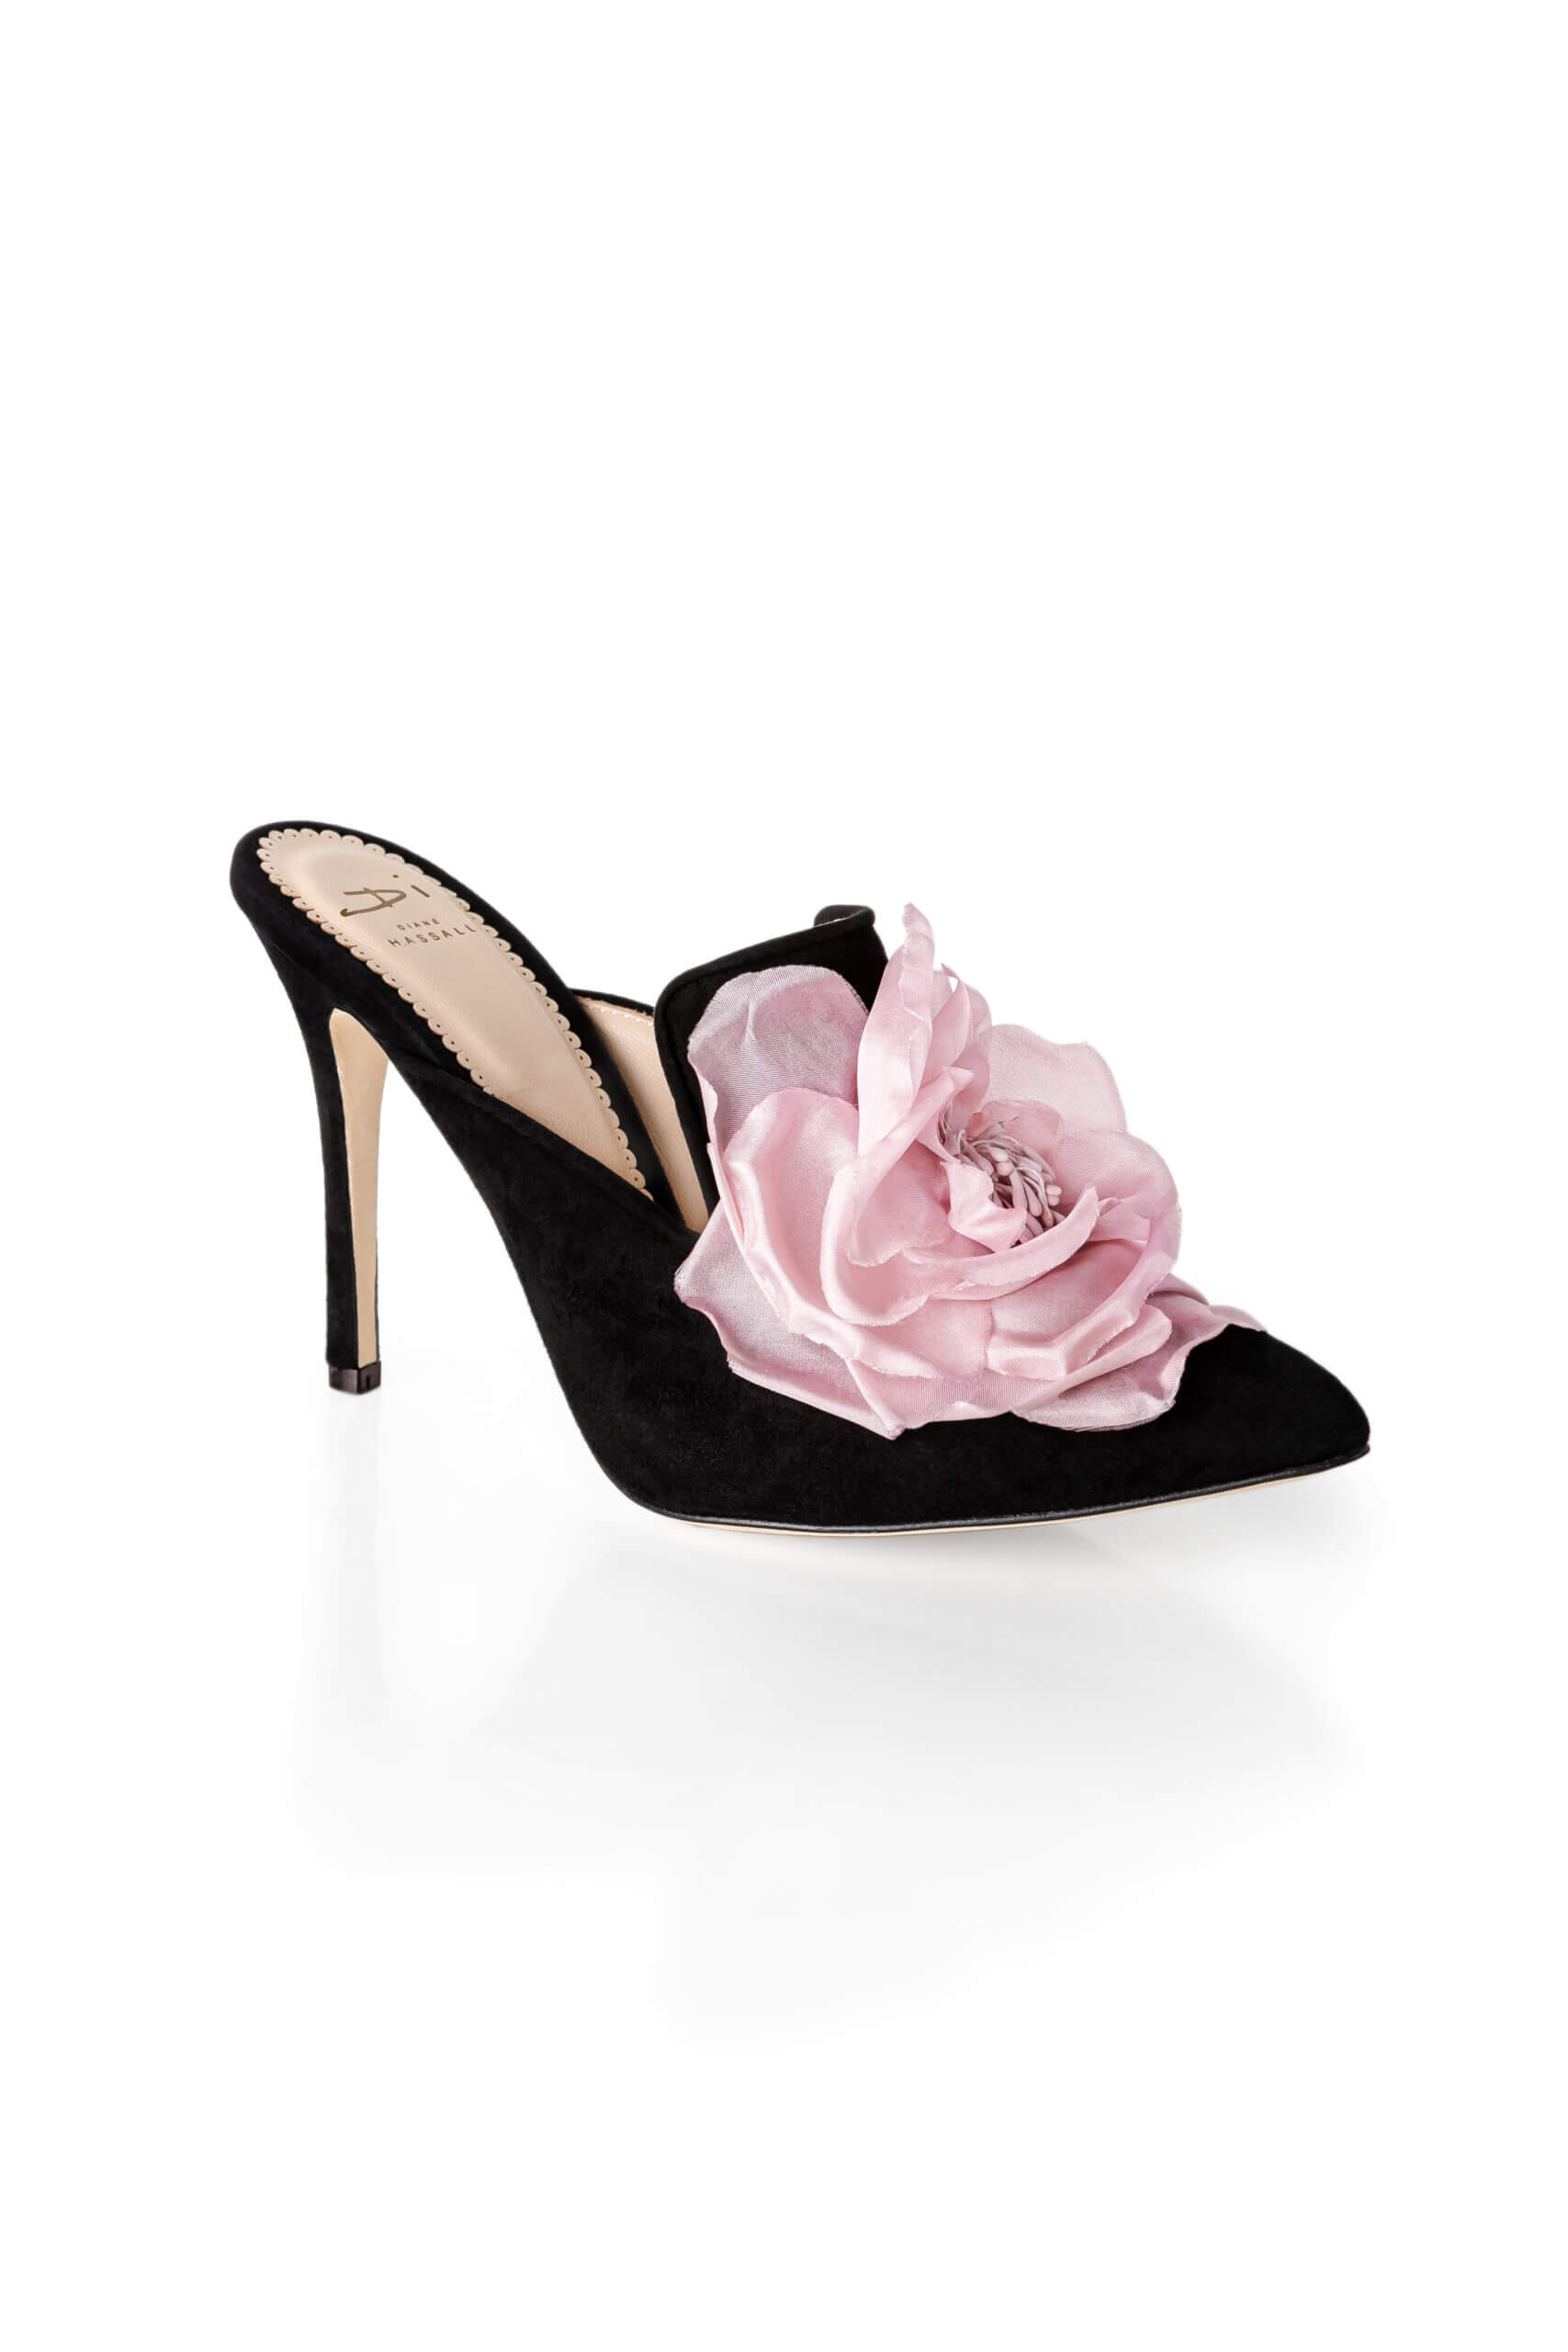 Cassis Rose Black floral bridal mules. Wedding shoes handmade by Di Hassall.